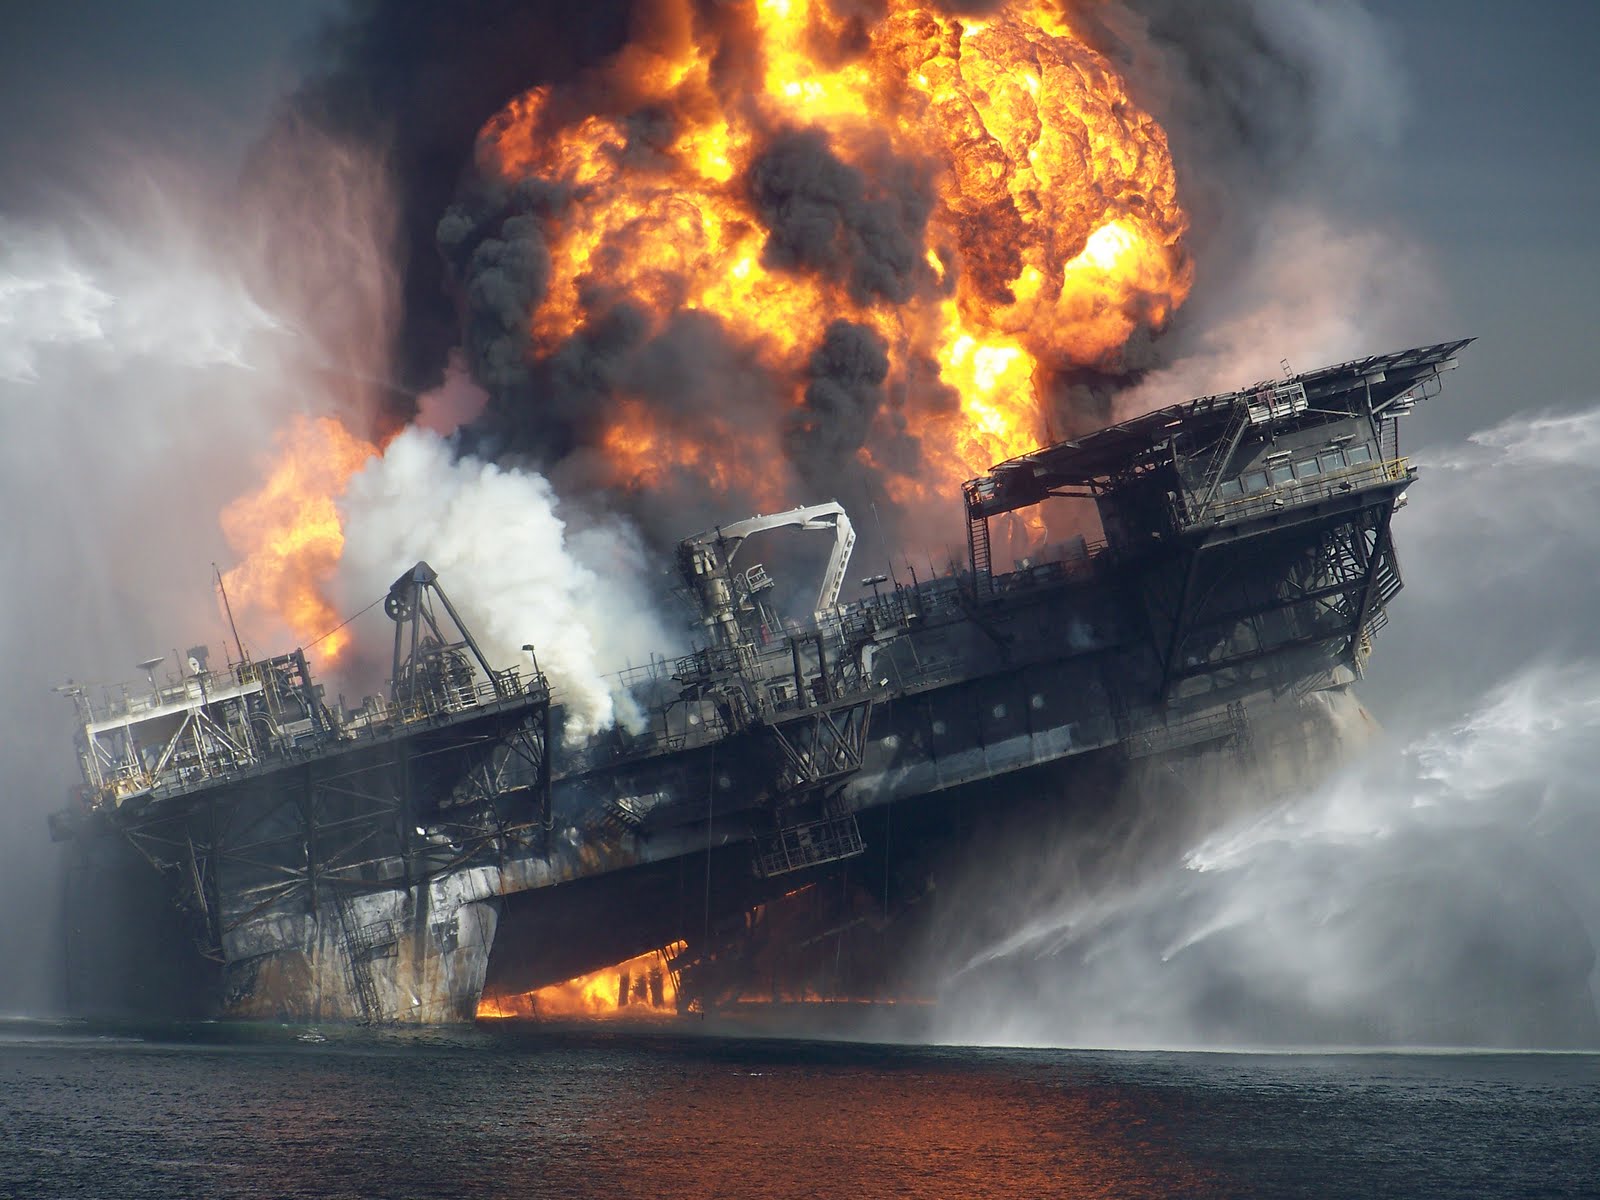 Deepwater Horizon: Disaster in the Gulf - LIFE and DEATH at the OIL RIG